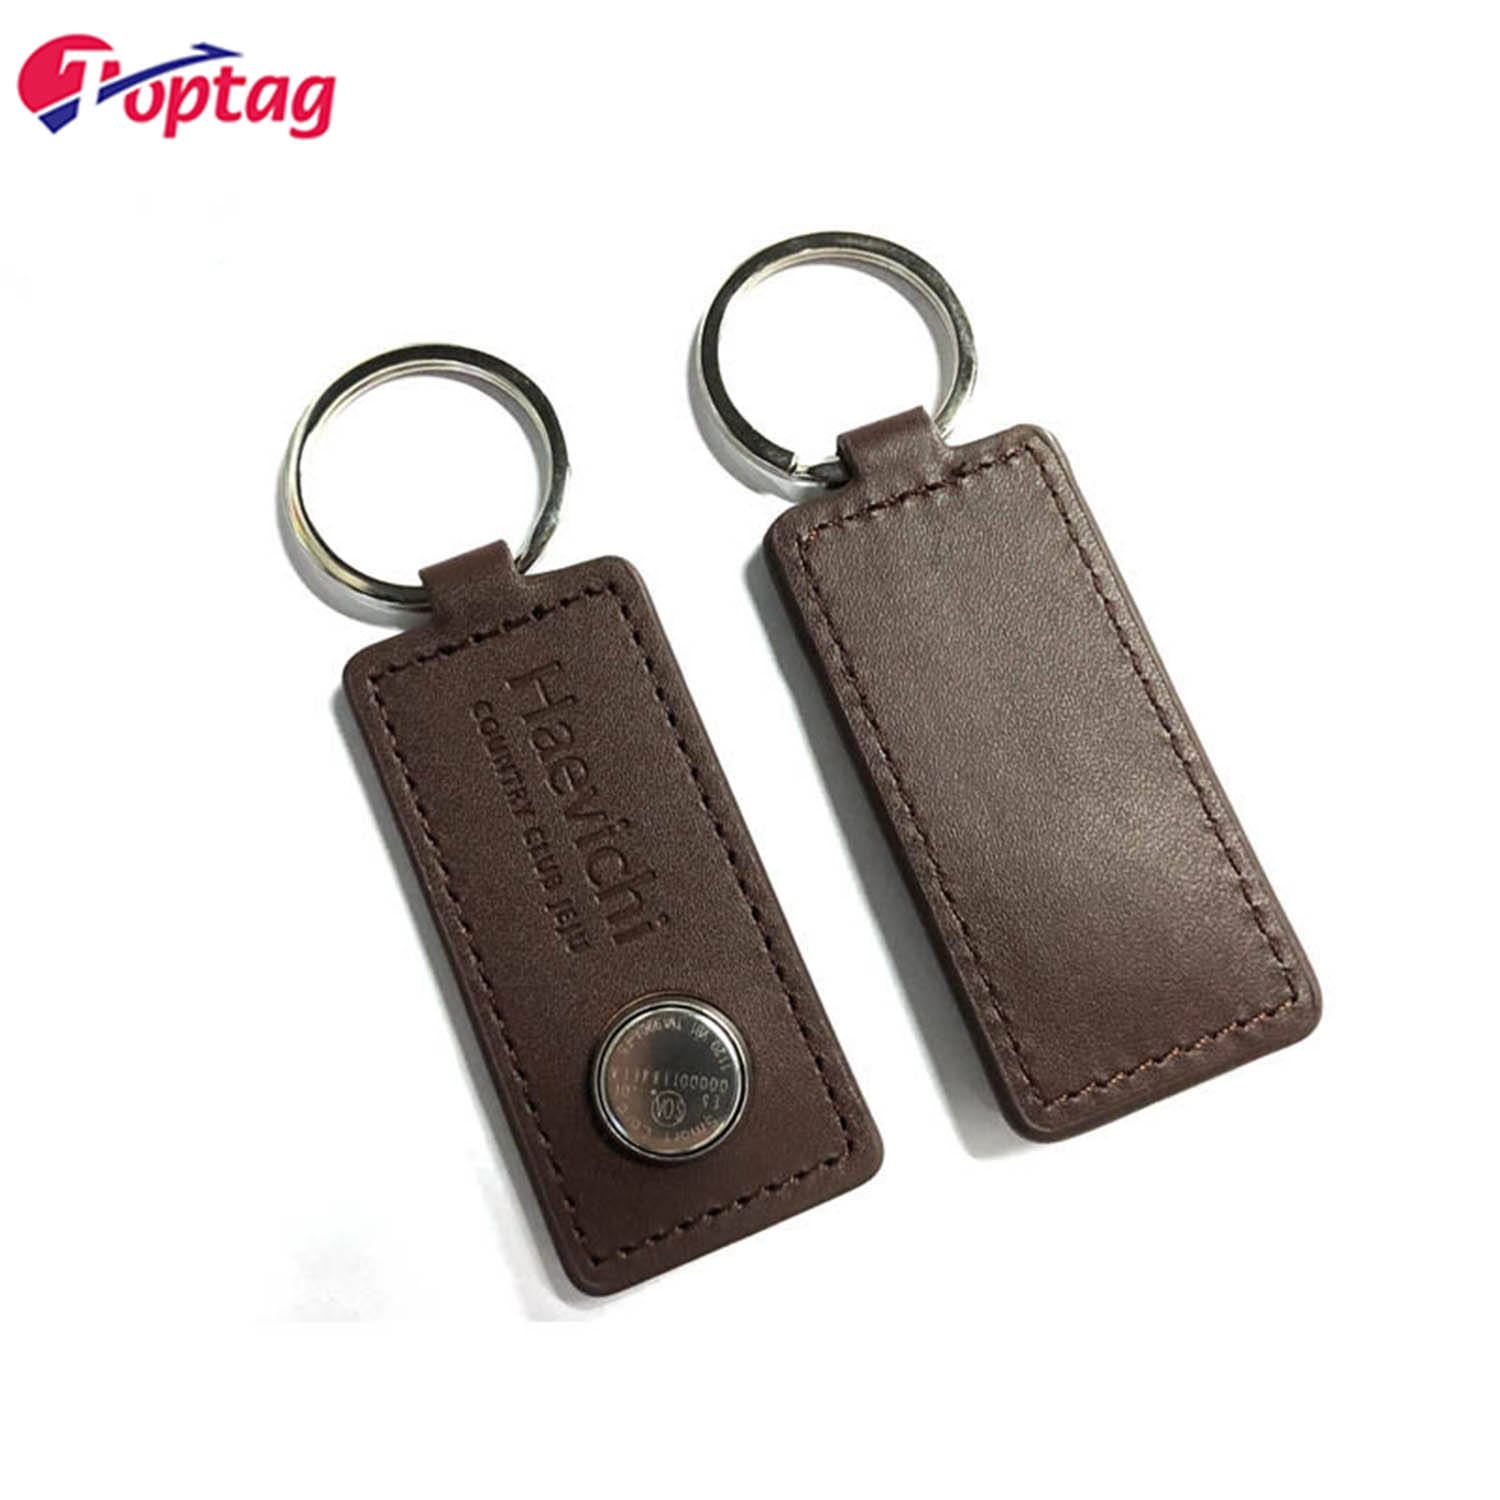 RFID TM Ibutton wristband bracelet TM Key with Leather/Plastic Holder for Access Control